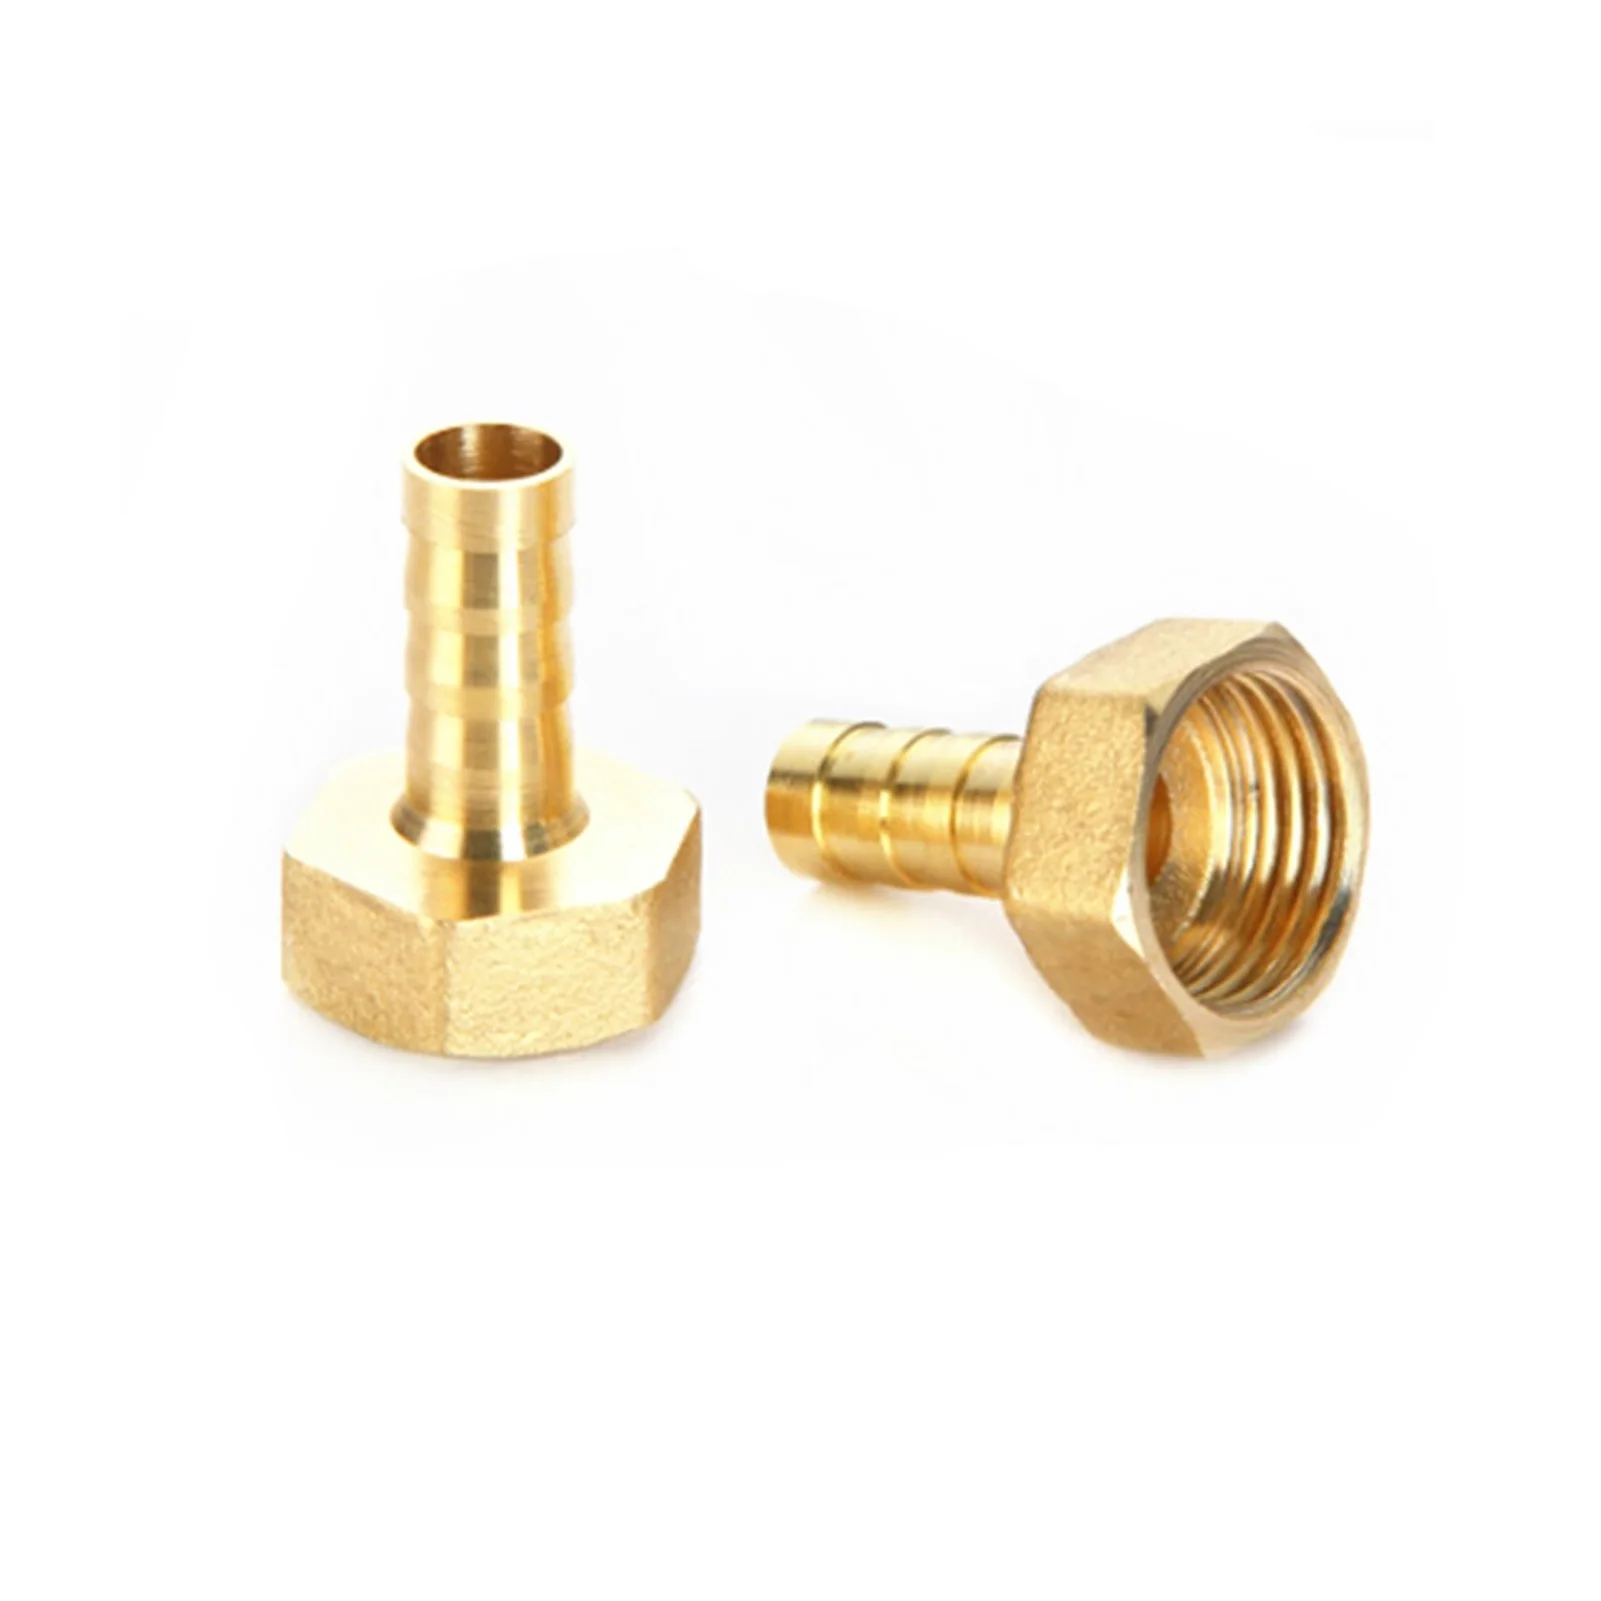 

2 pcs 4mm-19mm Barb Tail 1/8" 1/4" 1/2" 3/8" BSP Female Thread Brass Hose Fitting Copper Connector Joint Coupler Adapter